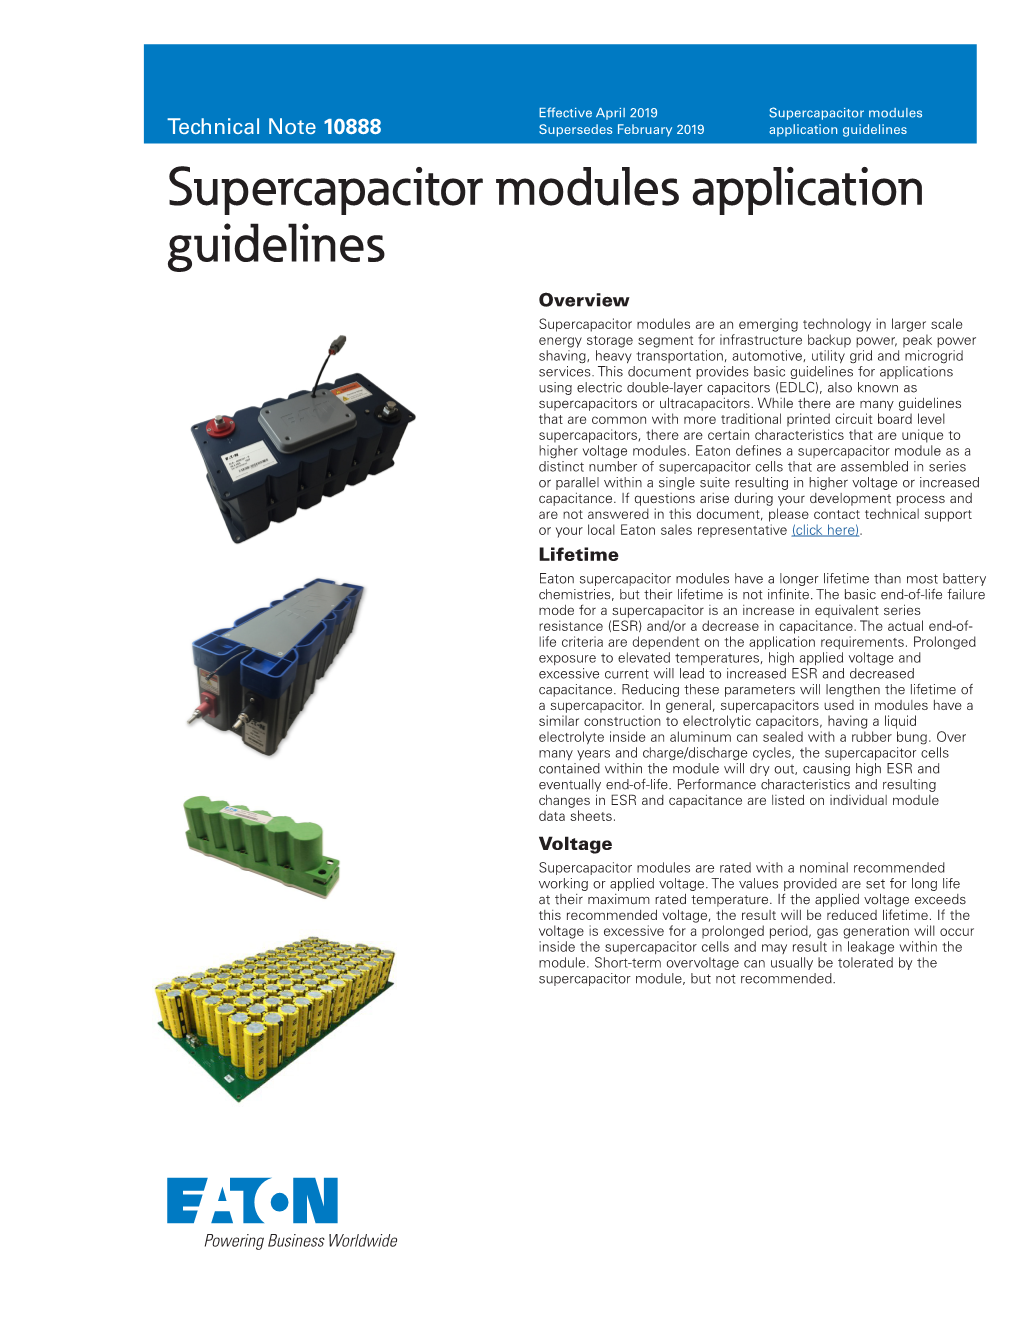 Supercapacitor Modules Application Guidelines